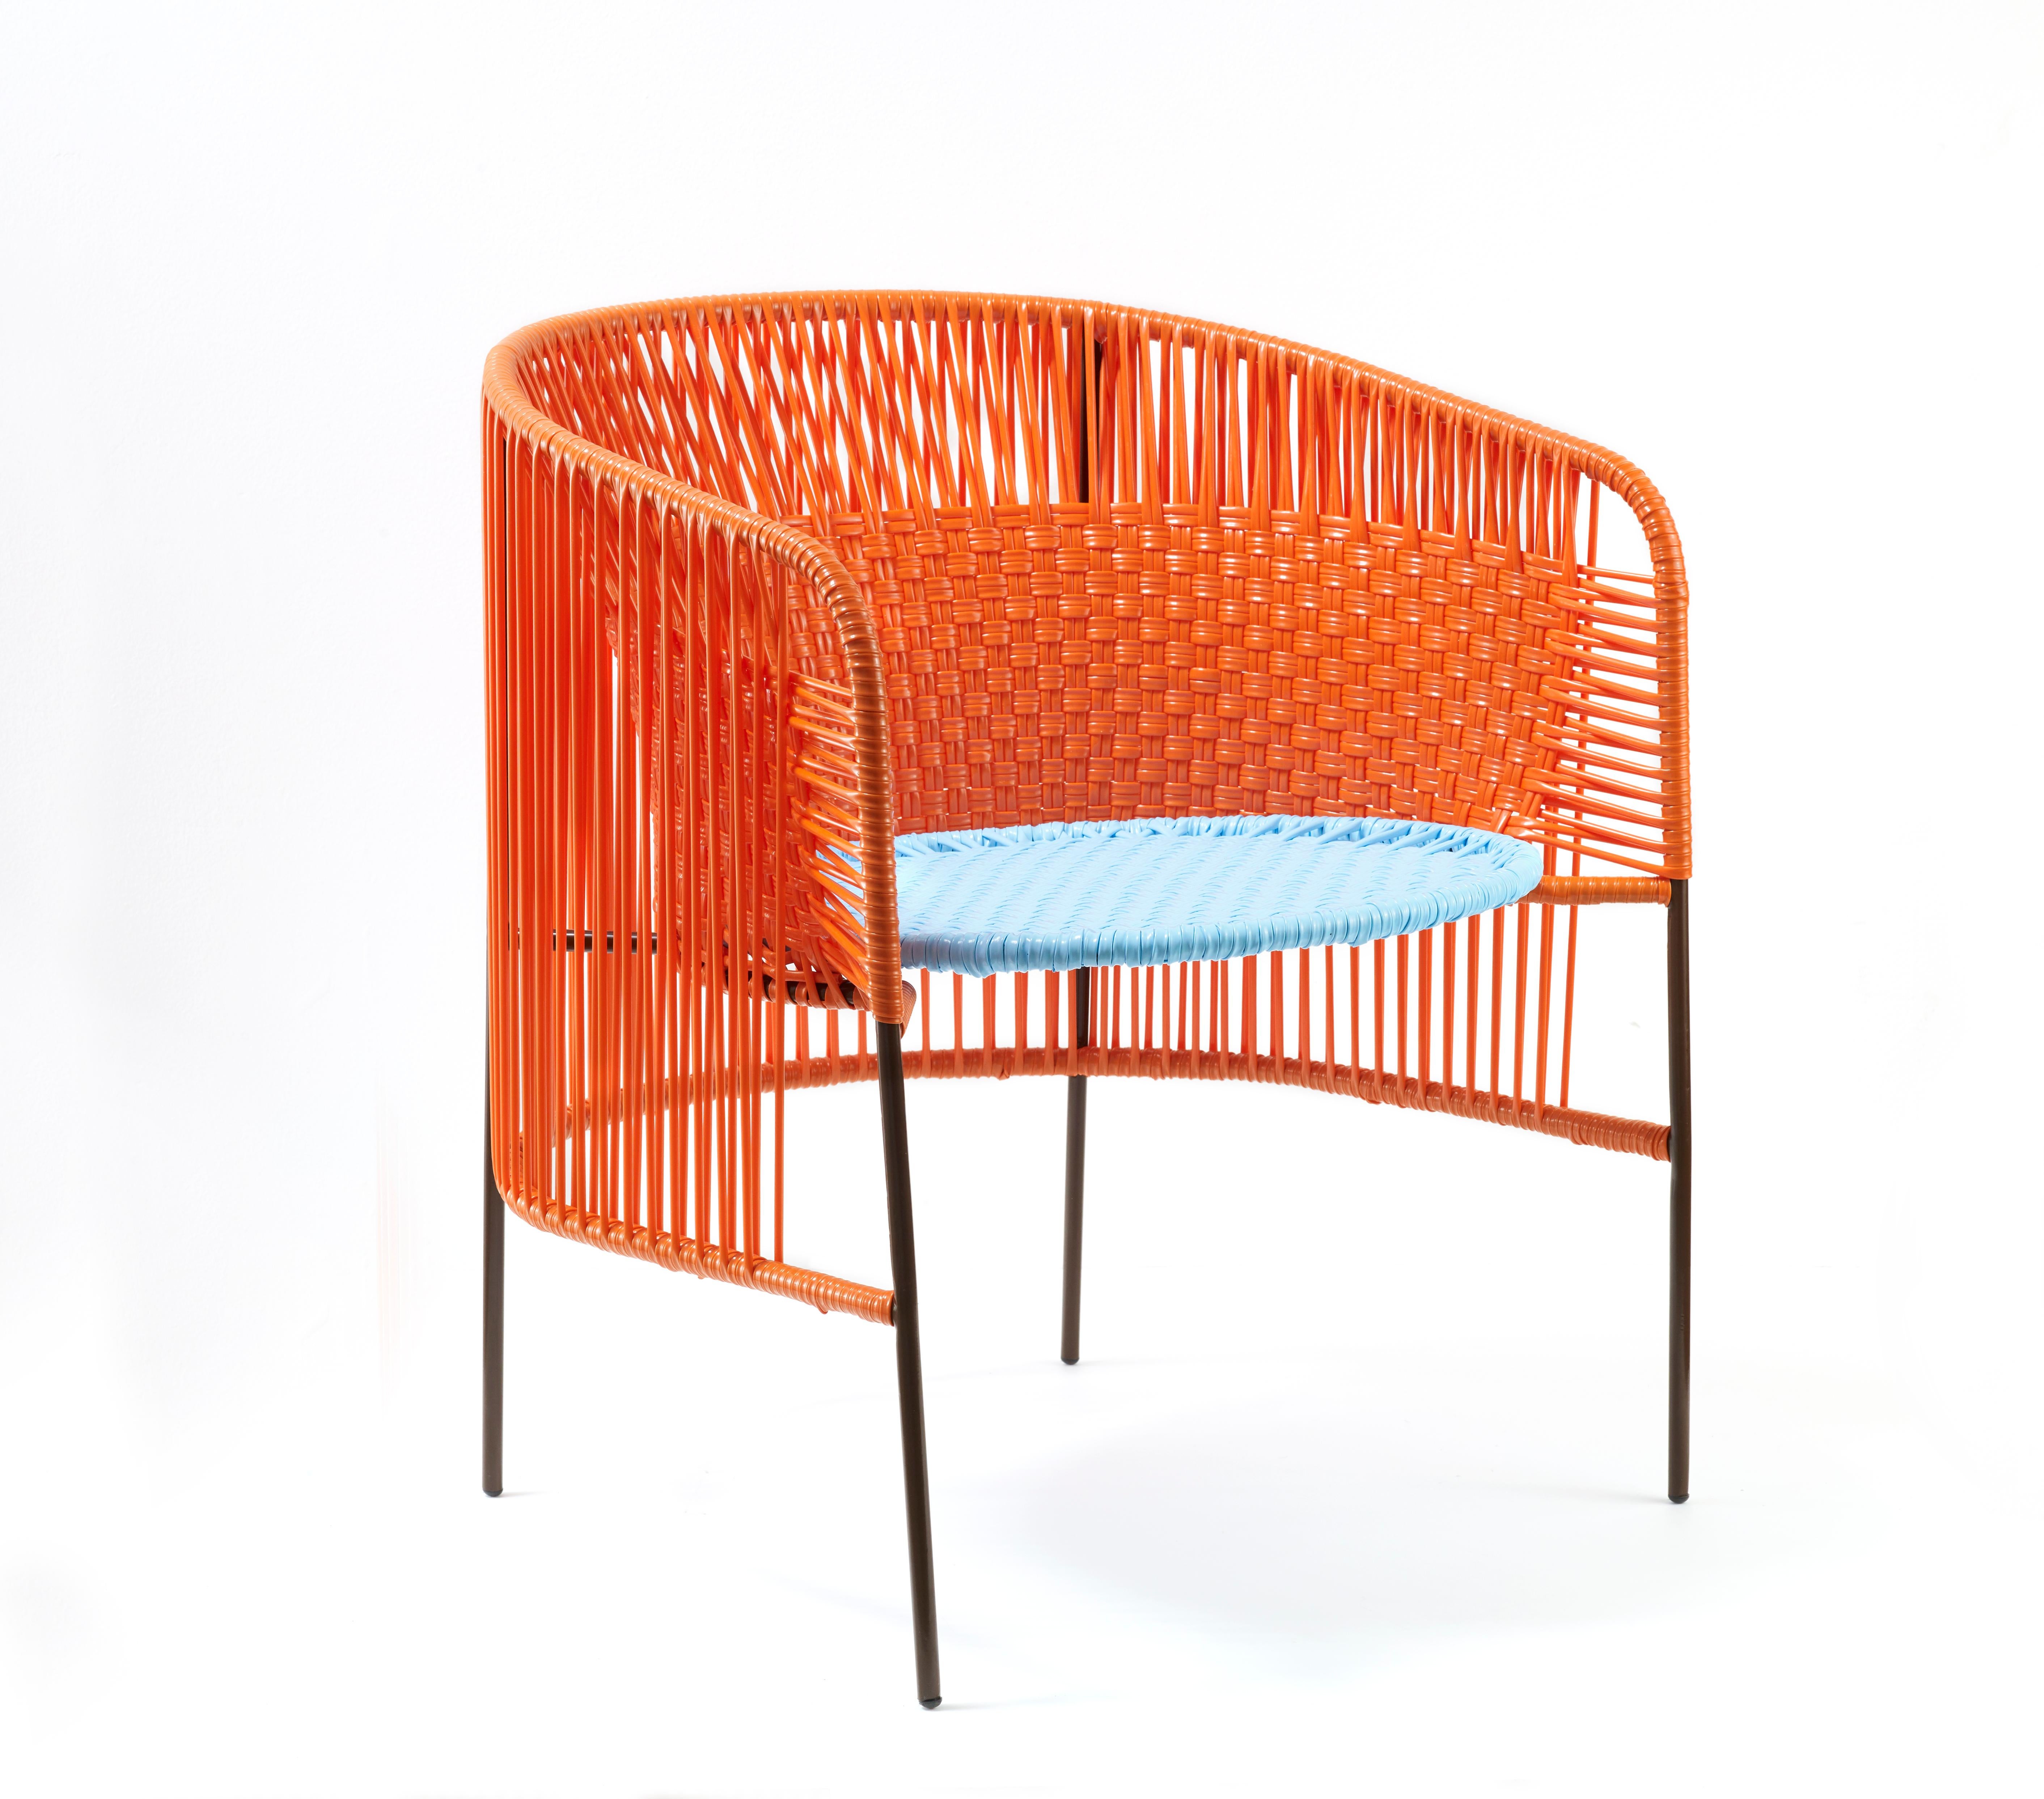 Orange Mint caribe lounge chair by Sebastian Herkner
Materials: Galvanized and powder-coated tubular steel. PVC strings are made from recycled plastic.
Technique: Made from recycled plastic and weaved by local craftspeople in Colombia.